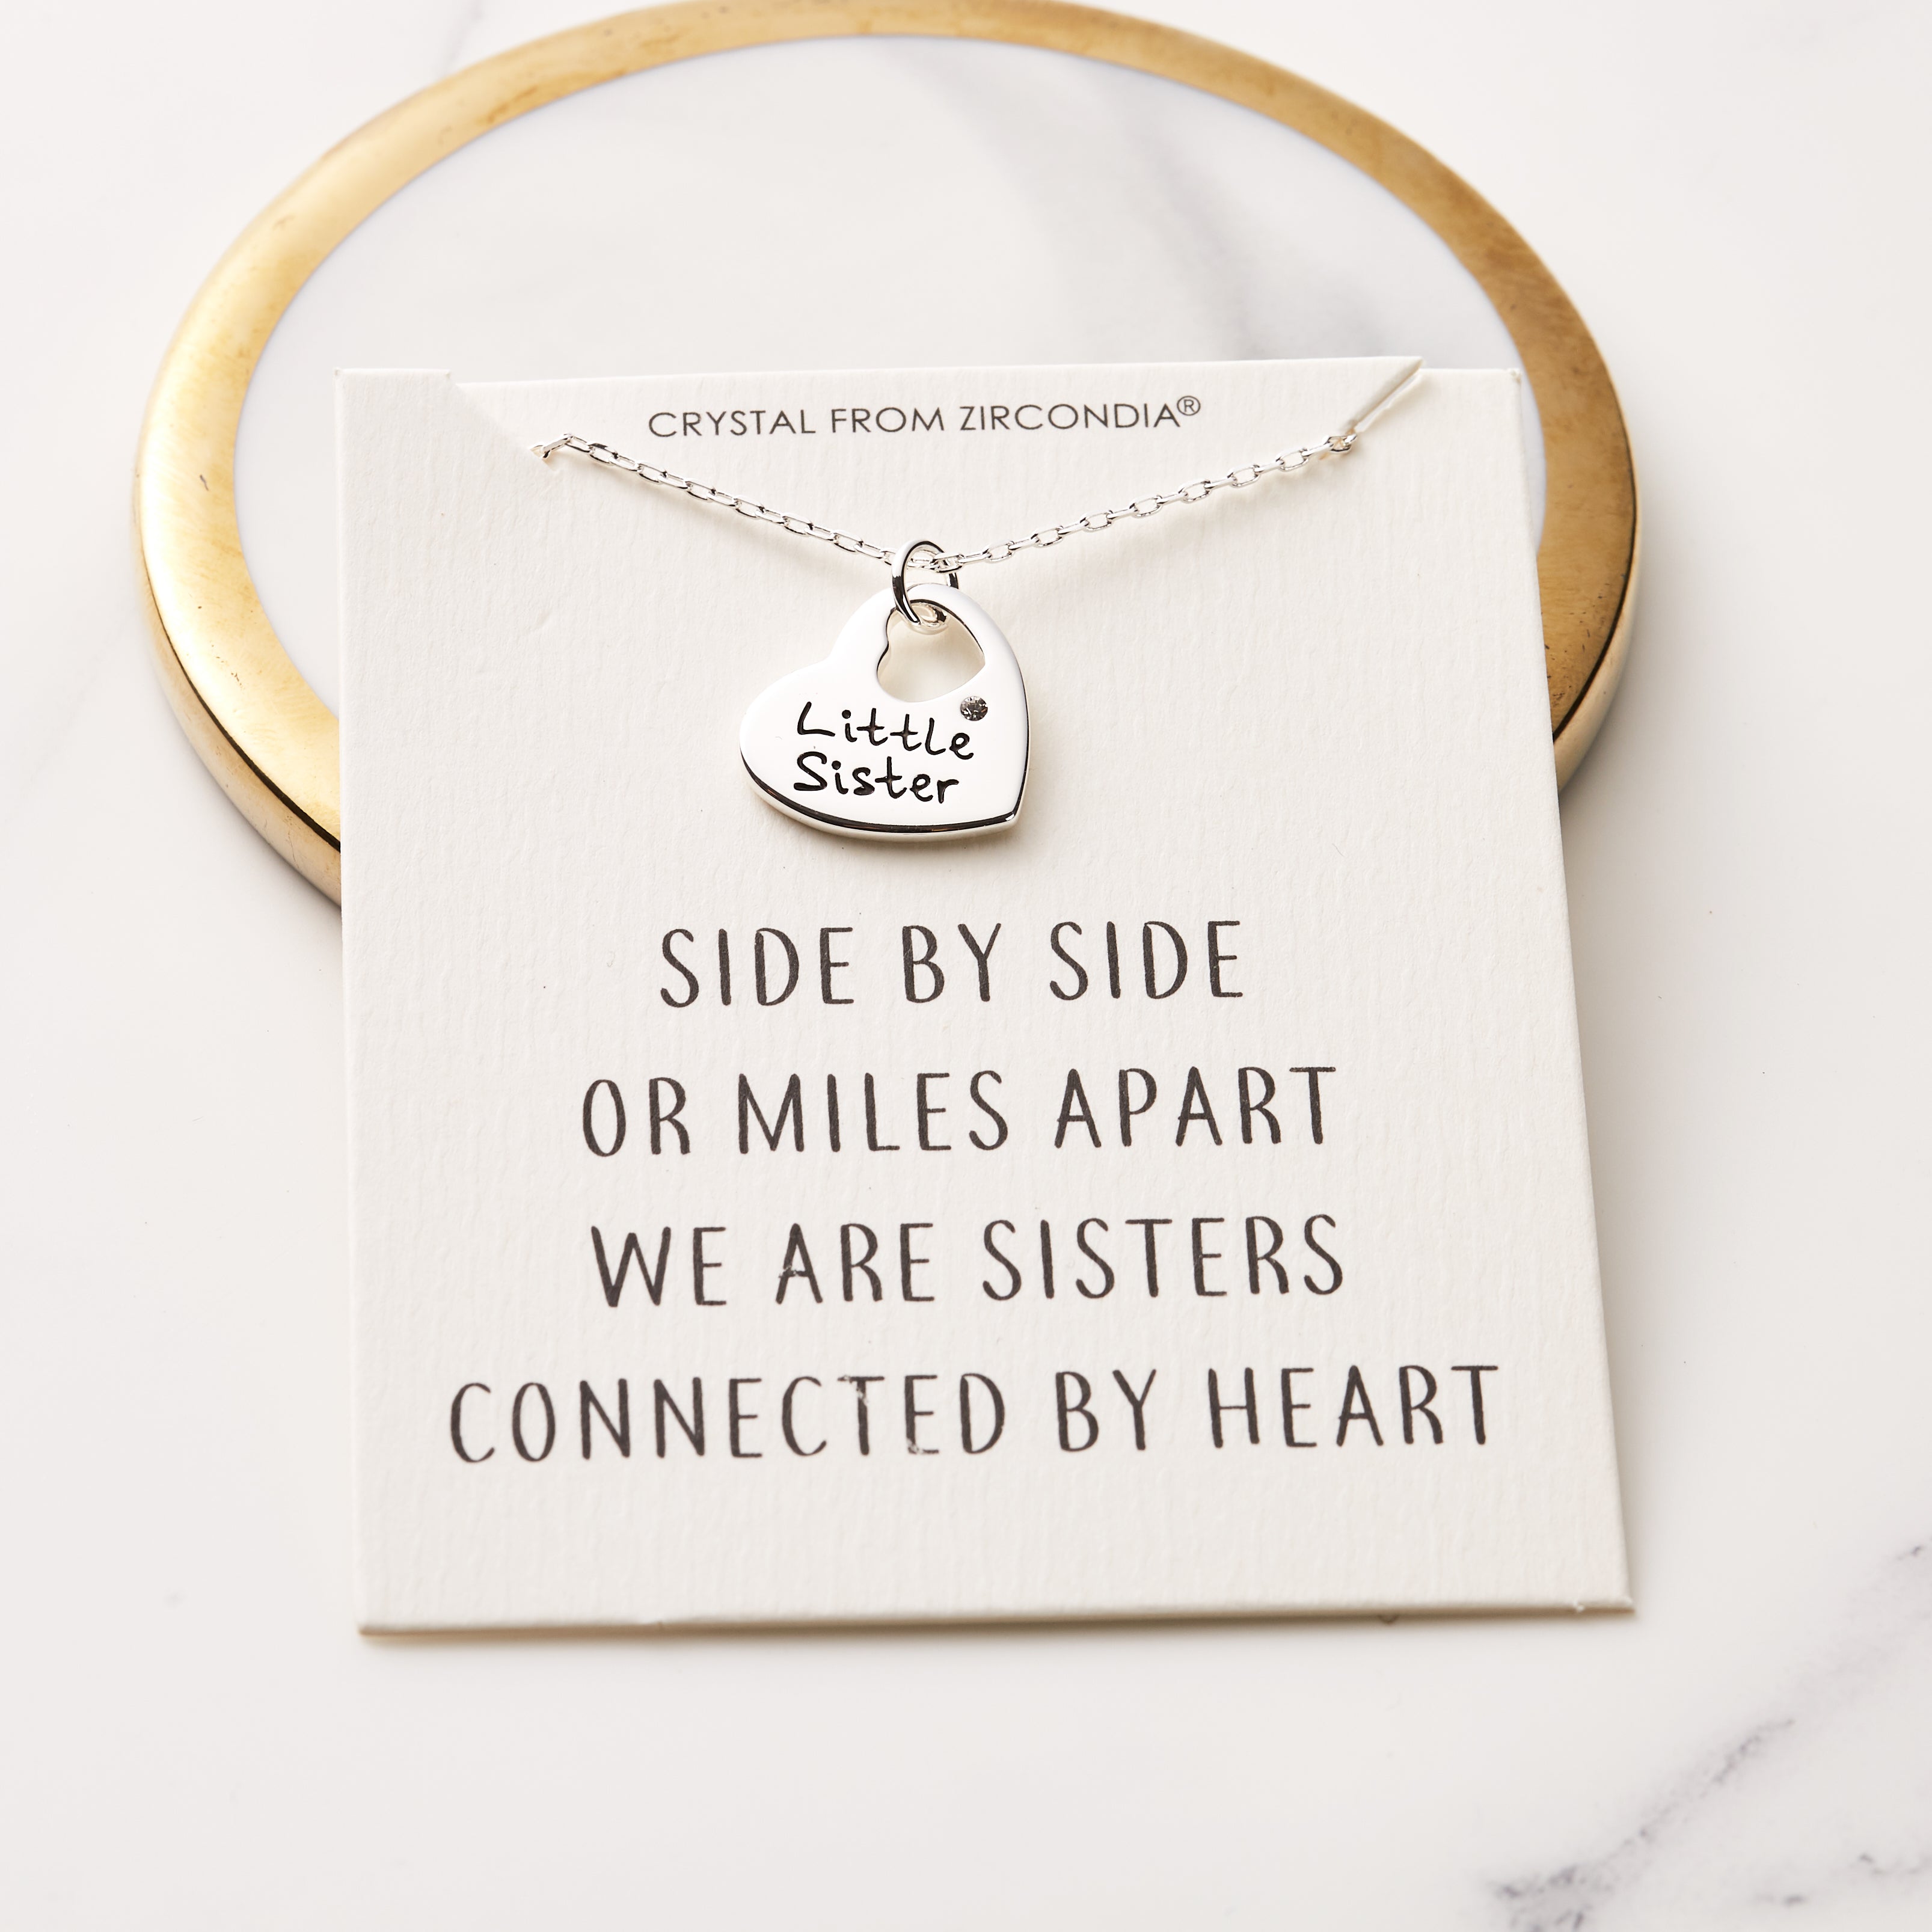 Little Sister Heart Necklace with Quote Card Created with Zircondia® Crystals